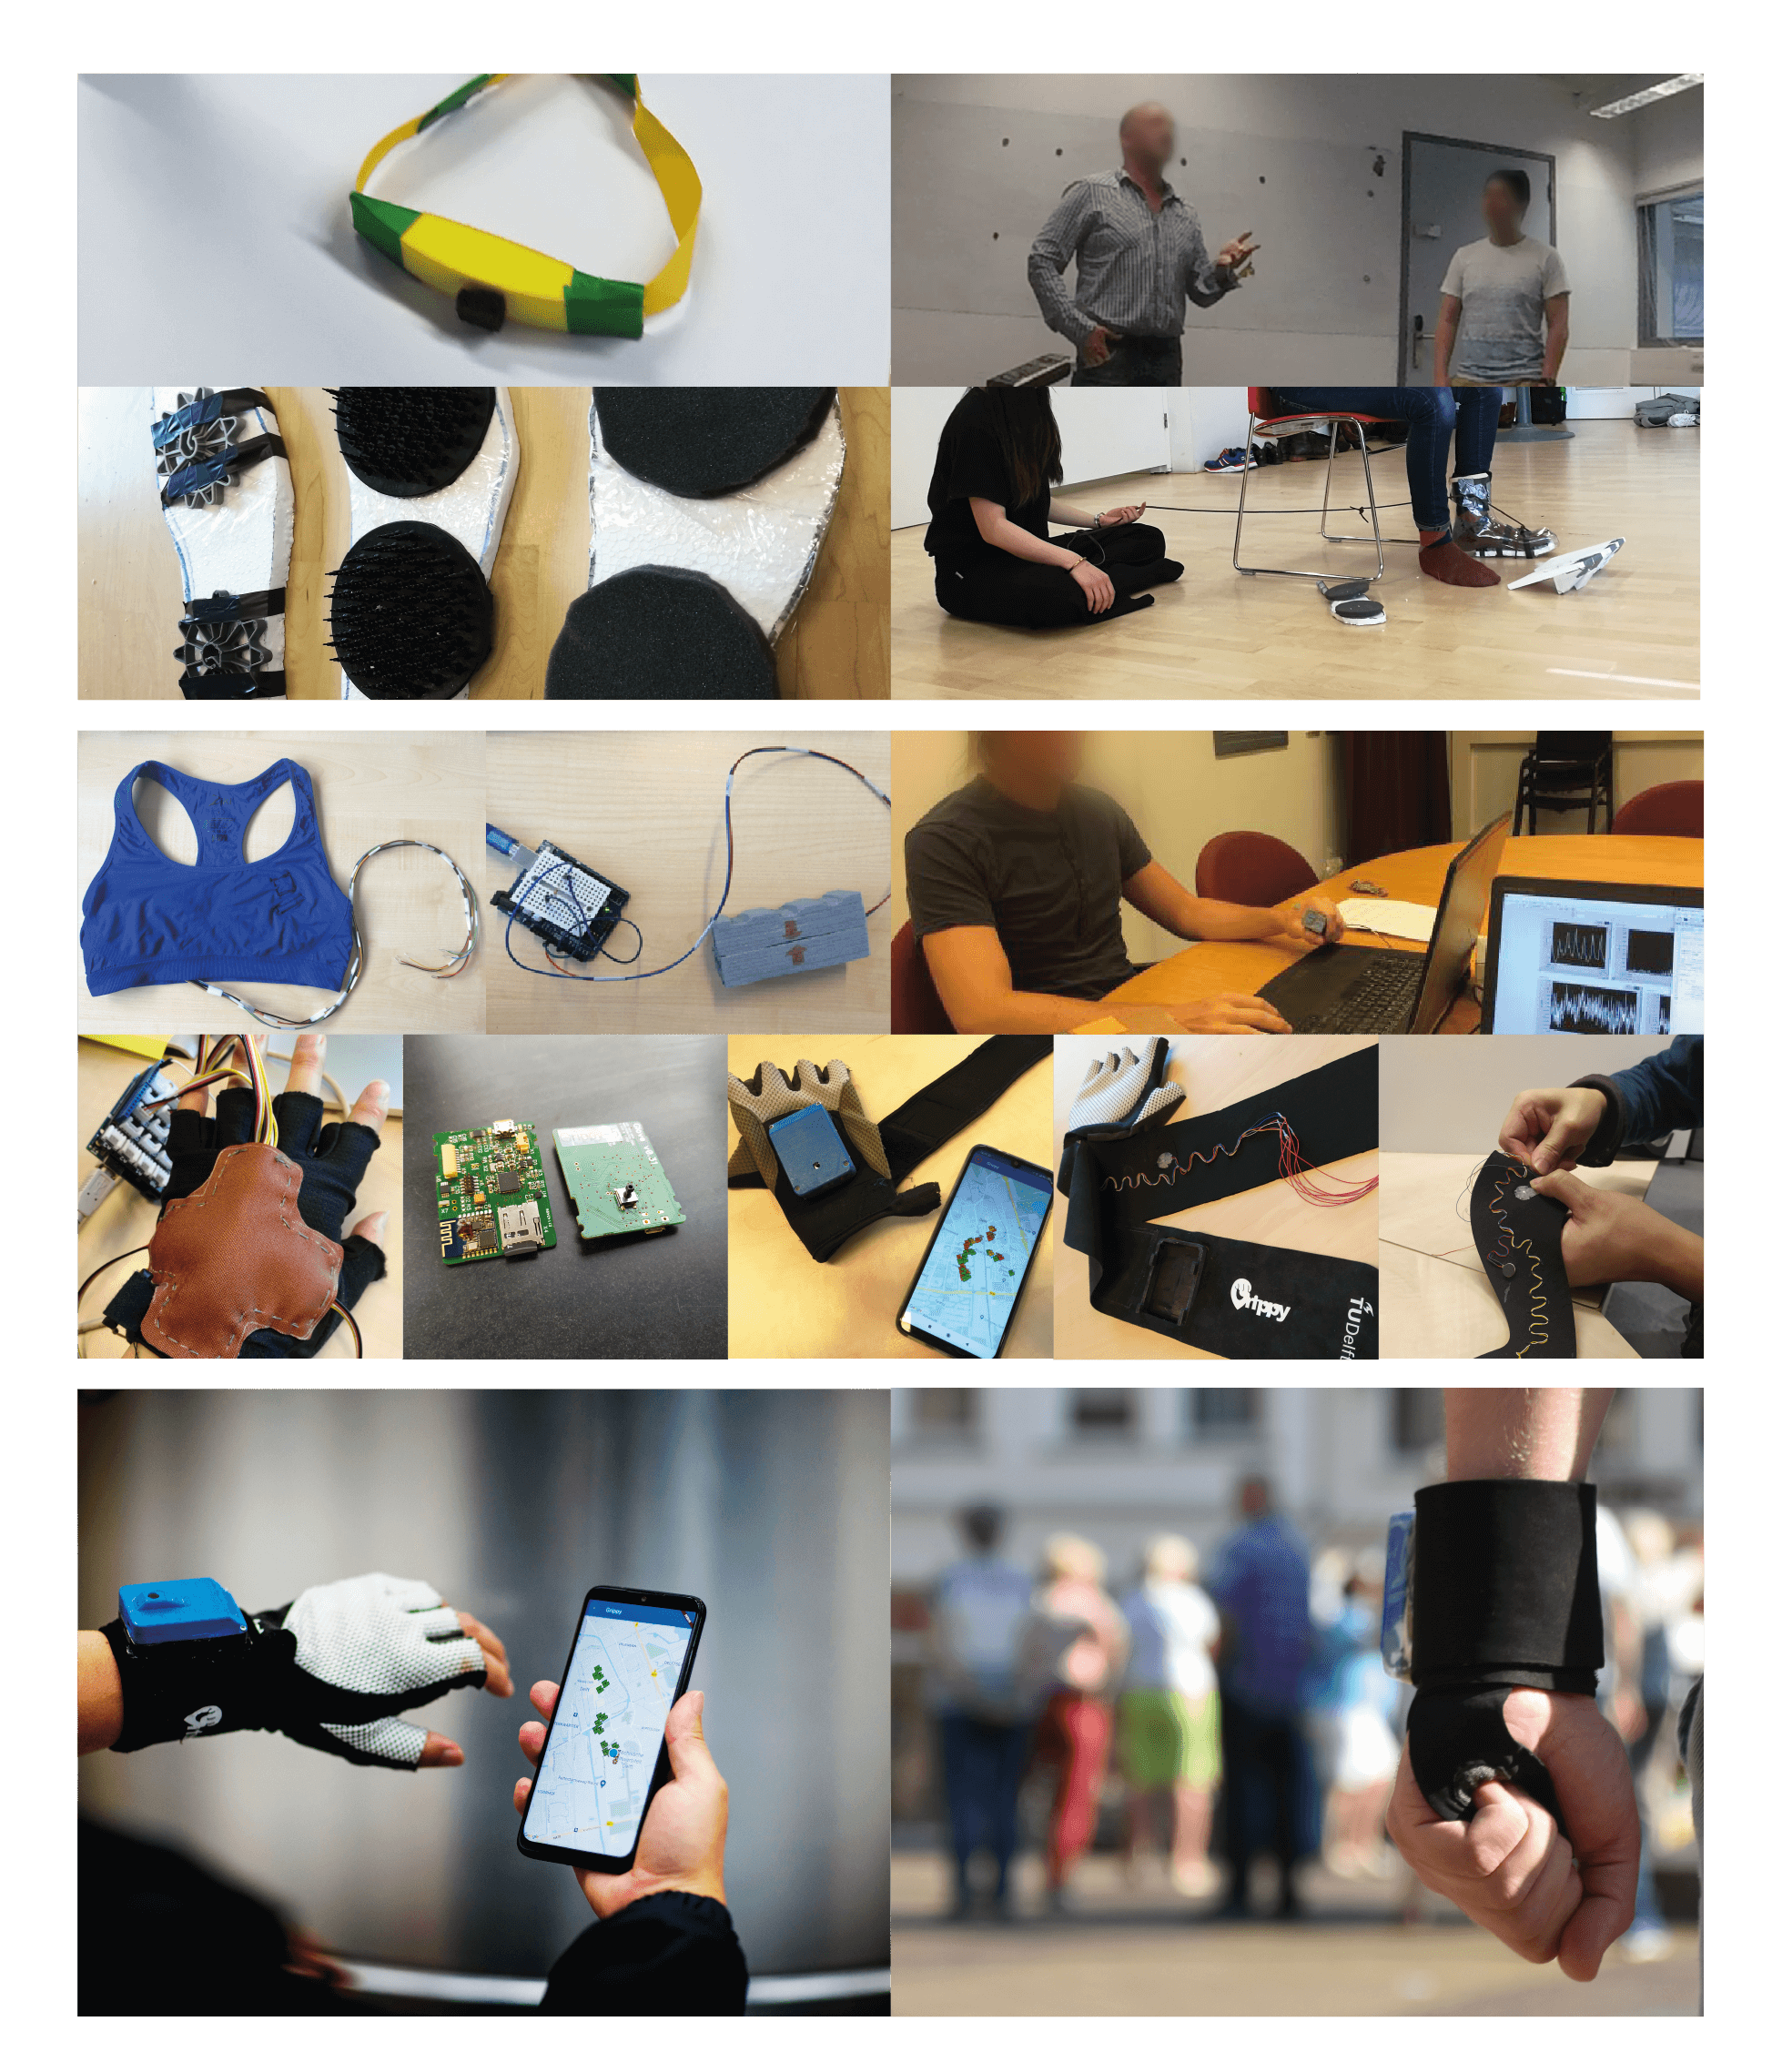 [Translate to English:] Impression of the glove in action during research experiments in the lab, with test subjects.